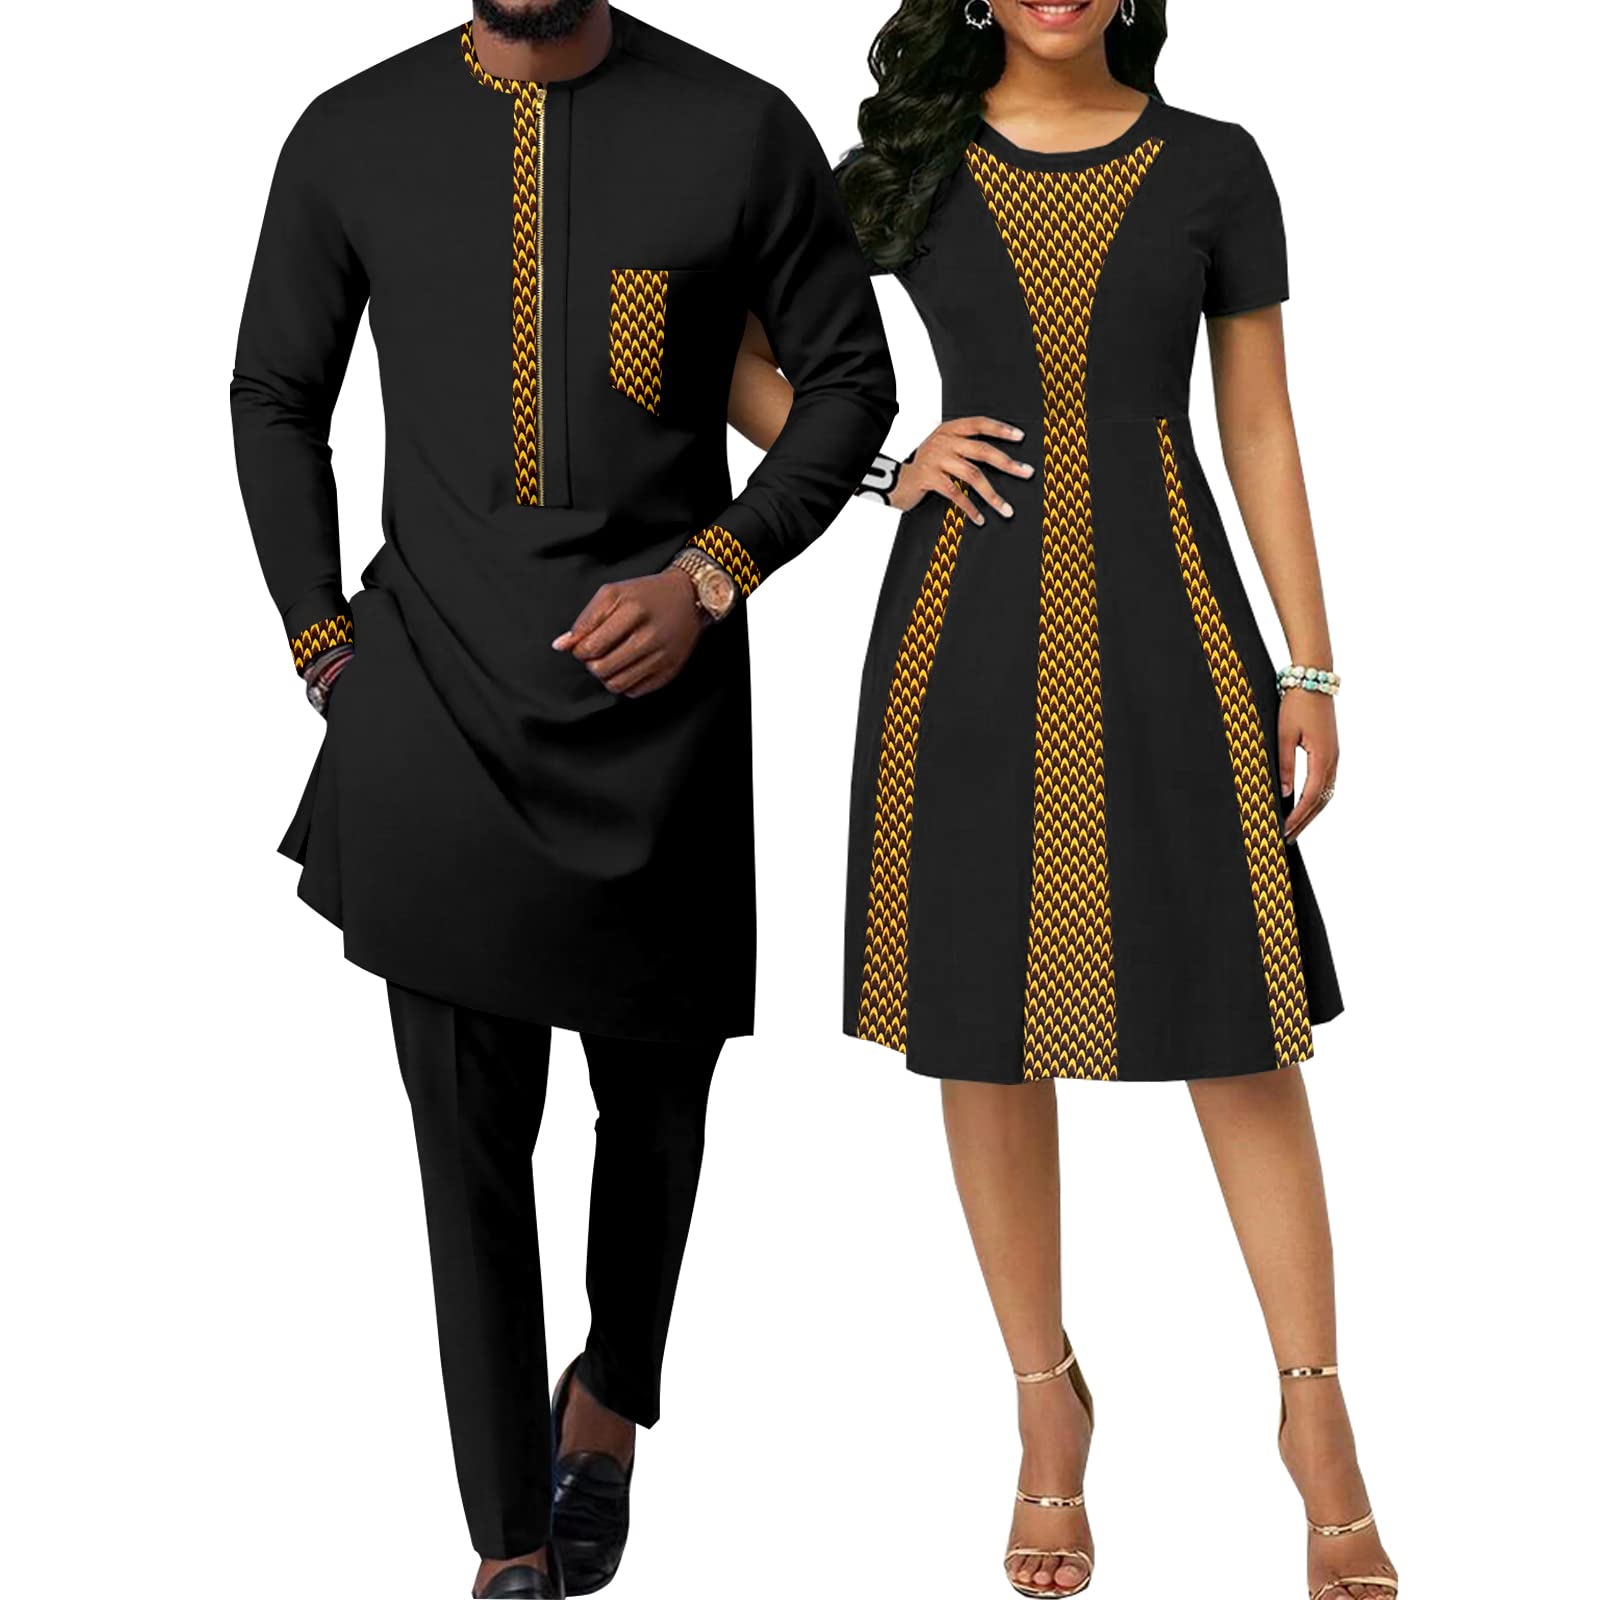 Realwax African Attire for Couple Women Print Wax Crew Neck Dress with Men Dashiki Long Vest Shirt and Pants Sets